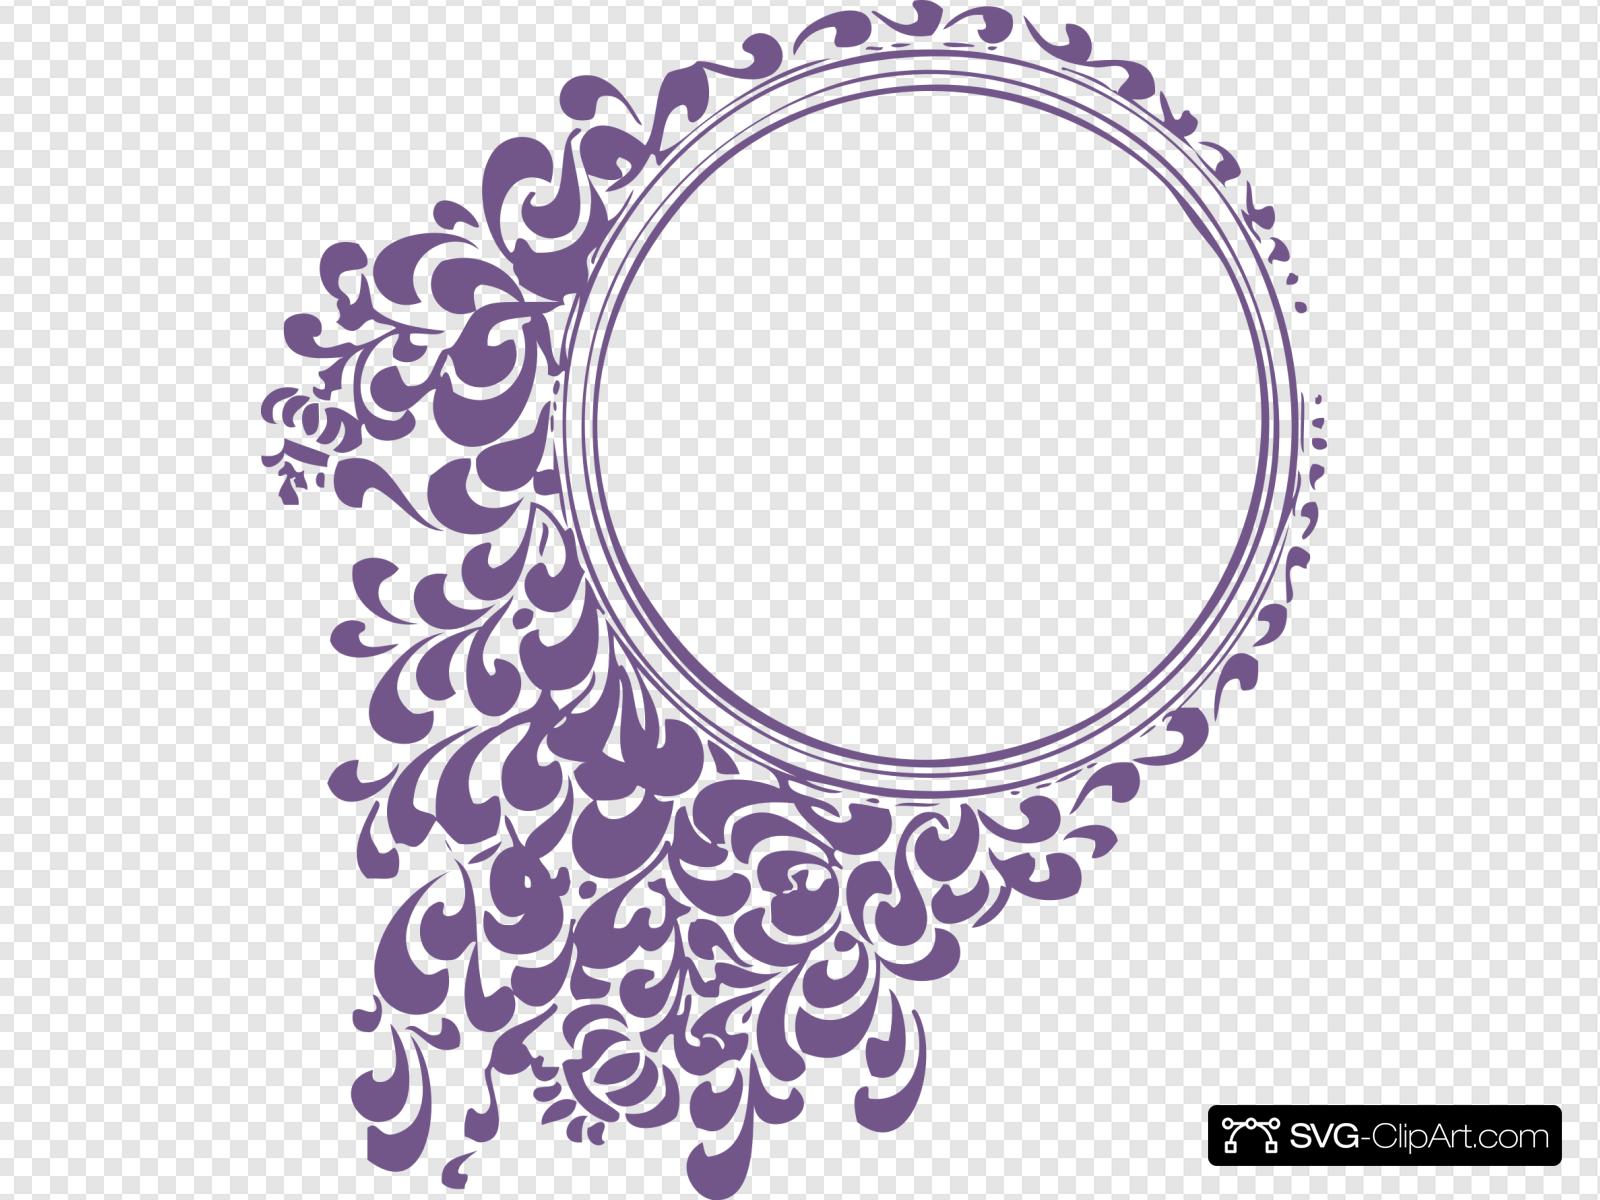 Wedding Scroll Clip art, Icon and SVG